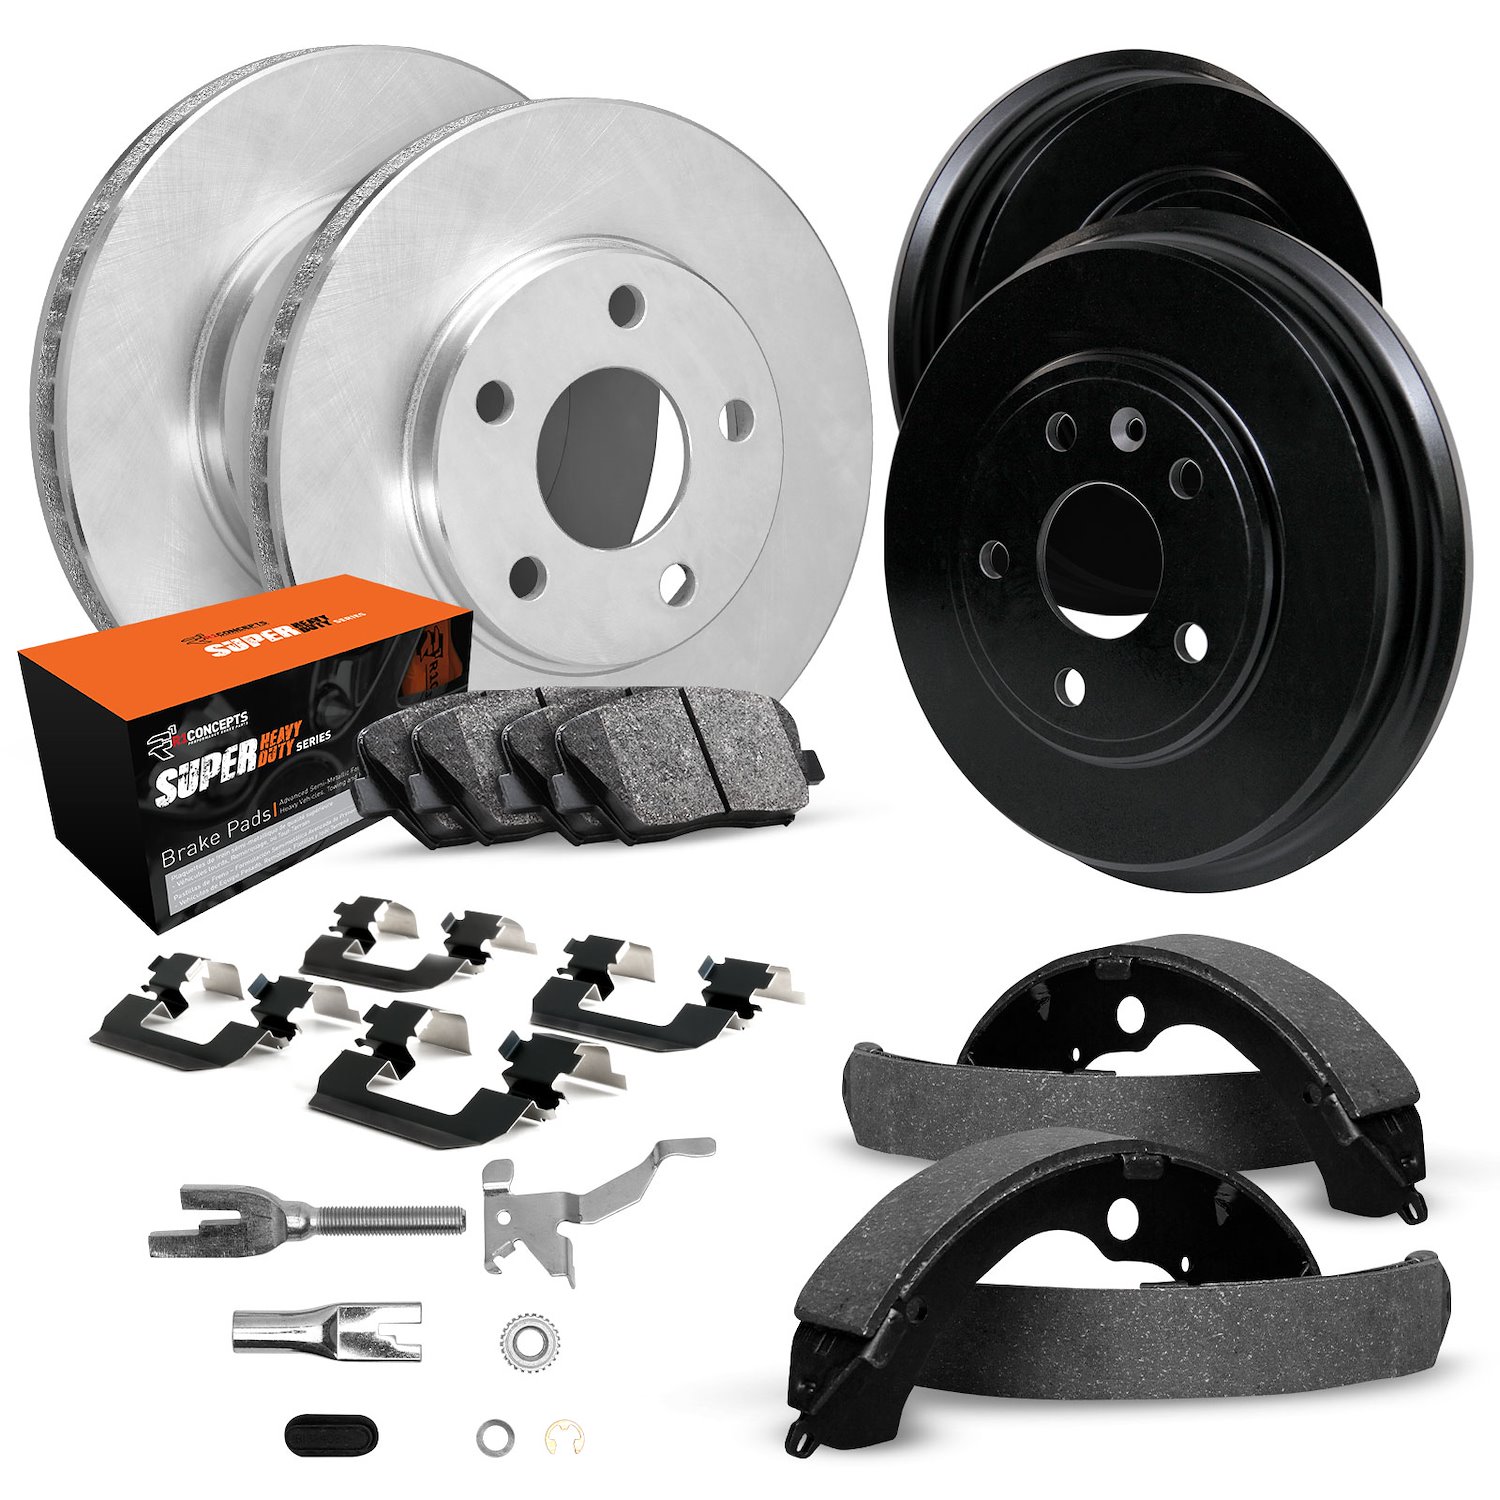 E-Line Blank Brake Rotor & Drum Set w/Super-Duty Pads, Shoes, Hardware, & Adjusters, 1990-1990 GM, Position: Front & Rear